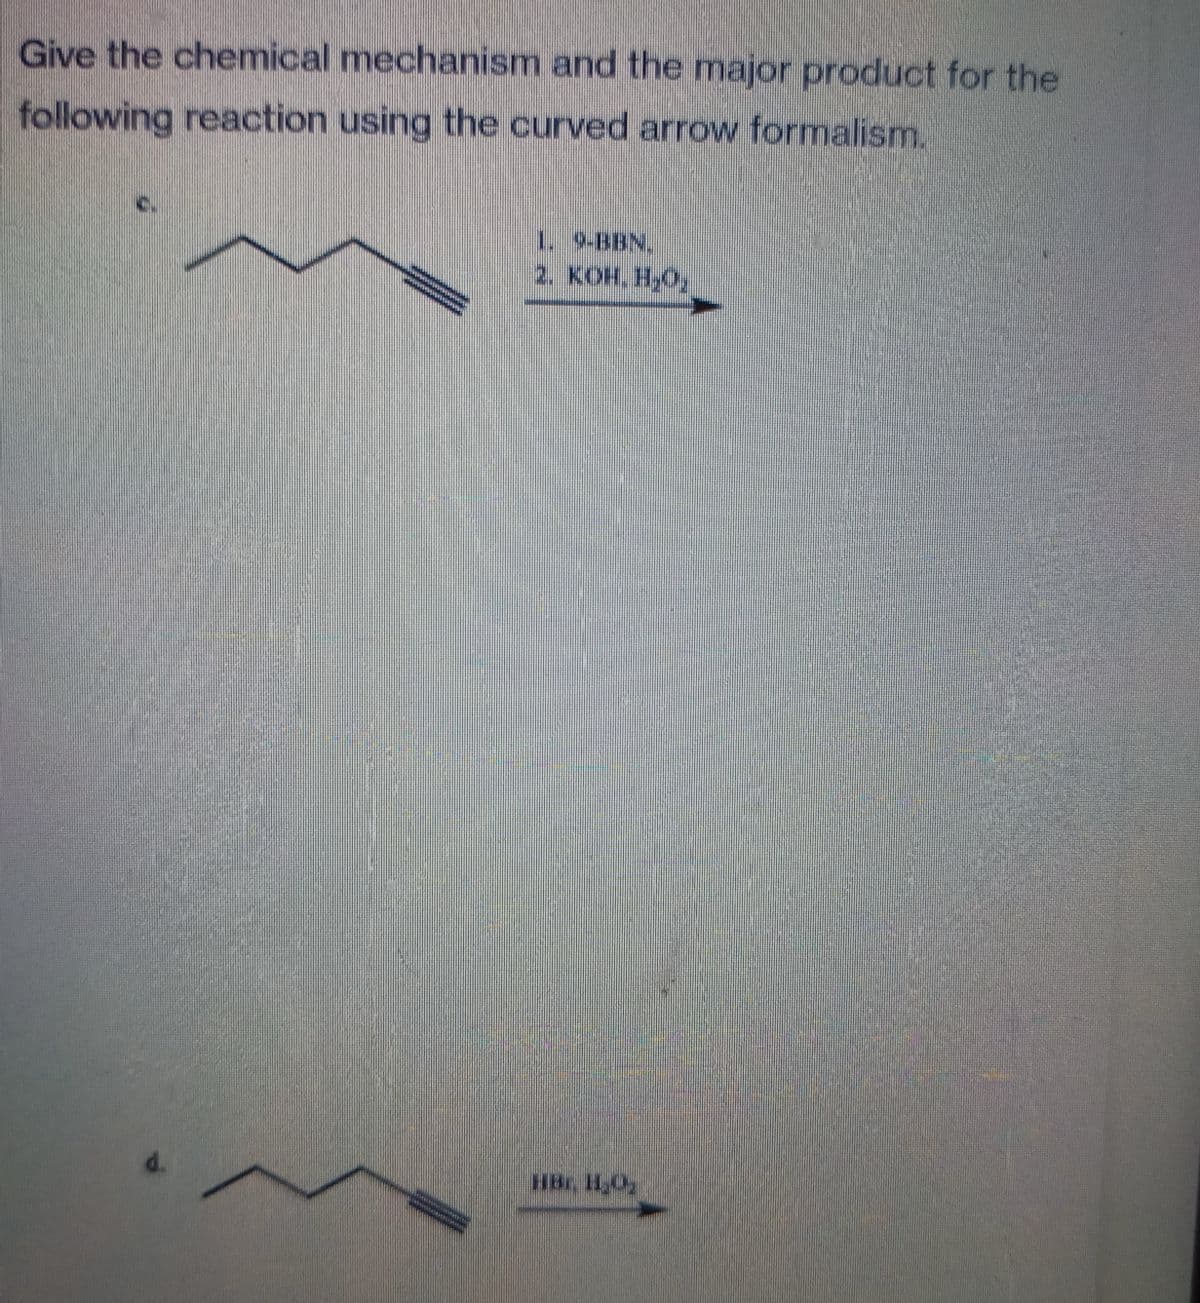 Give the chemical mechanism and the major product for the
following reaction using the curved arrow formalism.
2. KOH, HO,
HBr. H.O
